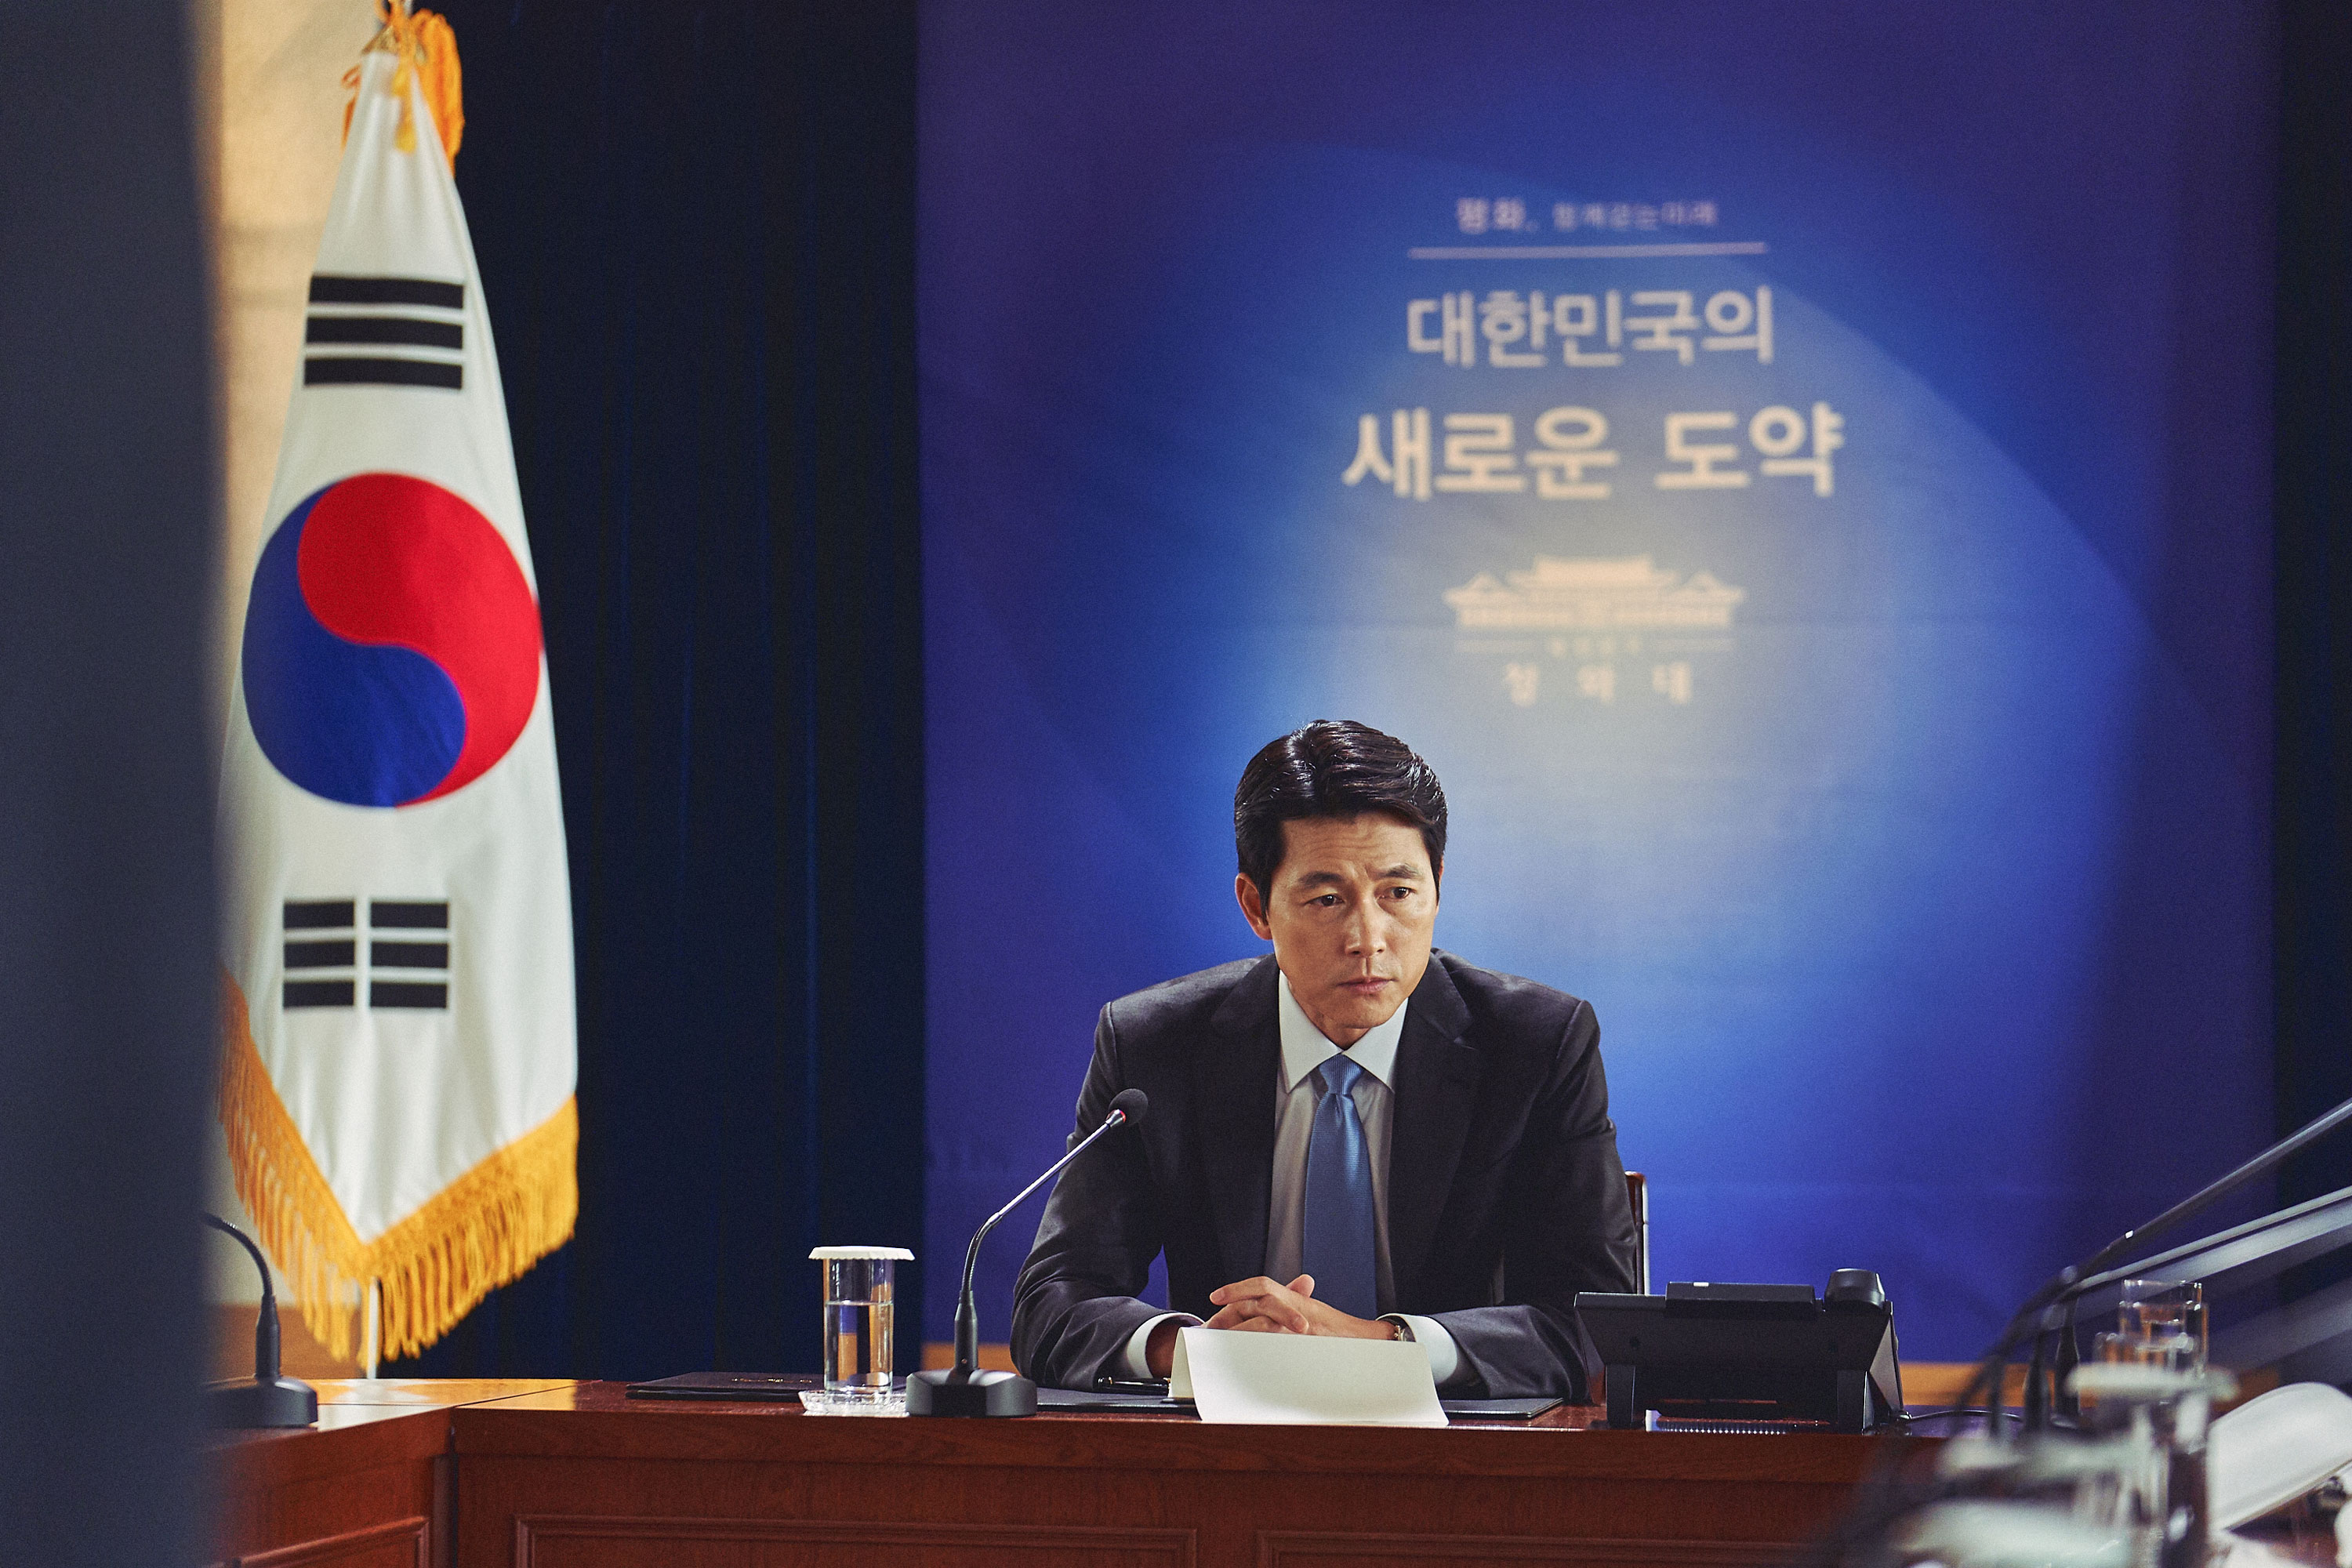 Actor Jung Woo-sung, who was divided into the president of the South Korea, expressed his candid worries.Jung Woo-sung said in a production report, The Steel Rain 2: Summit, which was held online on the morning of the 2nd, There are questions about the pain and meaning of the Korean peninsula.If 1 was a fantasy work that emphasized the message that it can create hope, 2 is cold and cool looking at the Korean peninsula in the international situation.You will be able to ask bigger questions. The Steel Rain 1 is also a fantasy, but it was not easy because of the weight contained in it. It seemed that the bishop threw the trials because he suddenly told me to do the president in 2.It was difficult to get a mind to do it together. Previously, Jung Woo-sung and Kwak Do-won played the role of Steel Rain 1 in South and North.In Steel Rain 2, Jung Woo-sung is divided into South Koreas President Han Kyung-jae, who is struggling for peace on the Korean Peninsula, and sets up a confrontation with Kwak Do-won, who plays the hard-line leader of the North, who is causing a coup against the peace agreement.Meanwhile, the Steel Rain 2: Summit depicts the Danger just before the war after the three leaders were kidnapped by the Norths nuclear submarine in a coup détat during the inter-Korean Summit.Yang Woo-suks new film, following the webtoon Stillane and the movie Steel Rain, realistically captures the Danger situation that may actually happen on the divided Korean peninsula and the stories of people surrounding it.It will be released on the 29th.